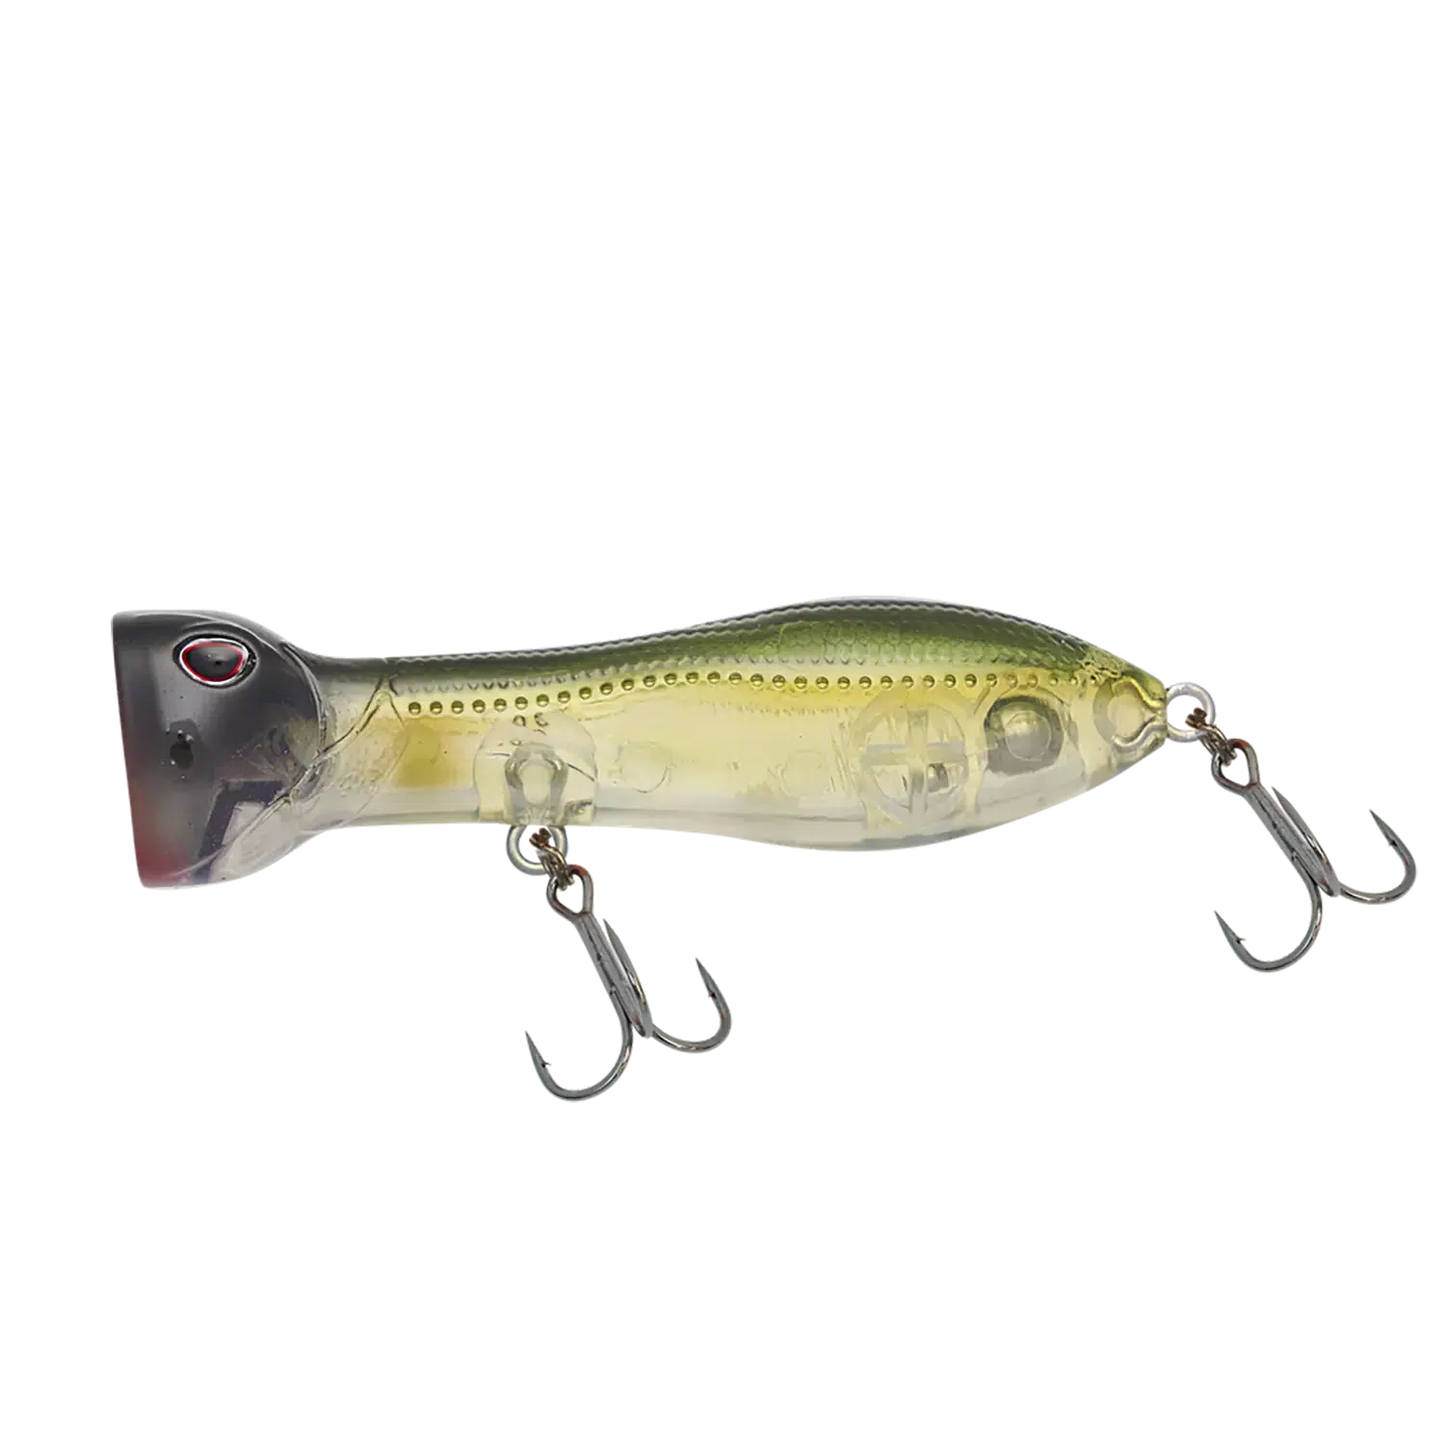 Nomad Chug Norris Auto Tune Light Tackle 72 FR-Lure - Poppers, Stickbaits & Pencils-Nomad-Ayu-Fishing Station